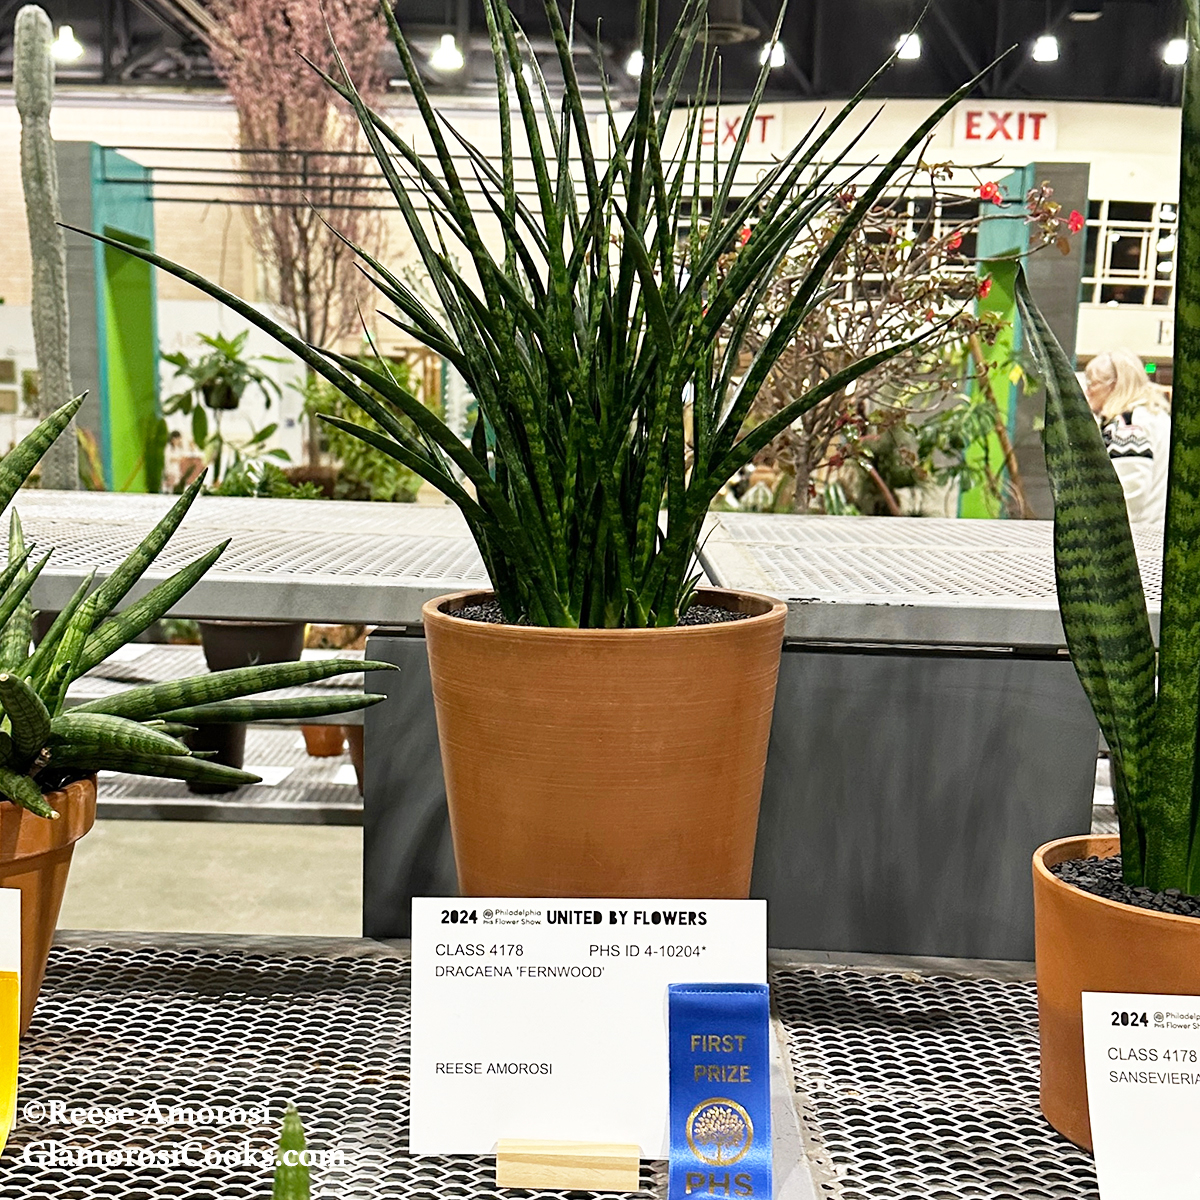 This photo shows a Dracaena Fernwood grown by Reese Amorosi of GlamorosiCooks.com. This photo shows the plant in competition at the 2024 PHS Philadelphia Flower Show. The plant has multiple long, thin leaves that grow outward in a "v" shape. It is in a tall terracotta pot, and in front of it there is a white card with the plant's details and a blue First Prize ribbon.